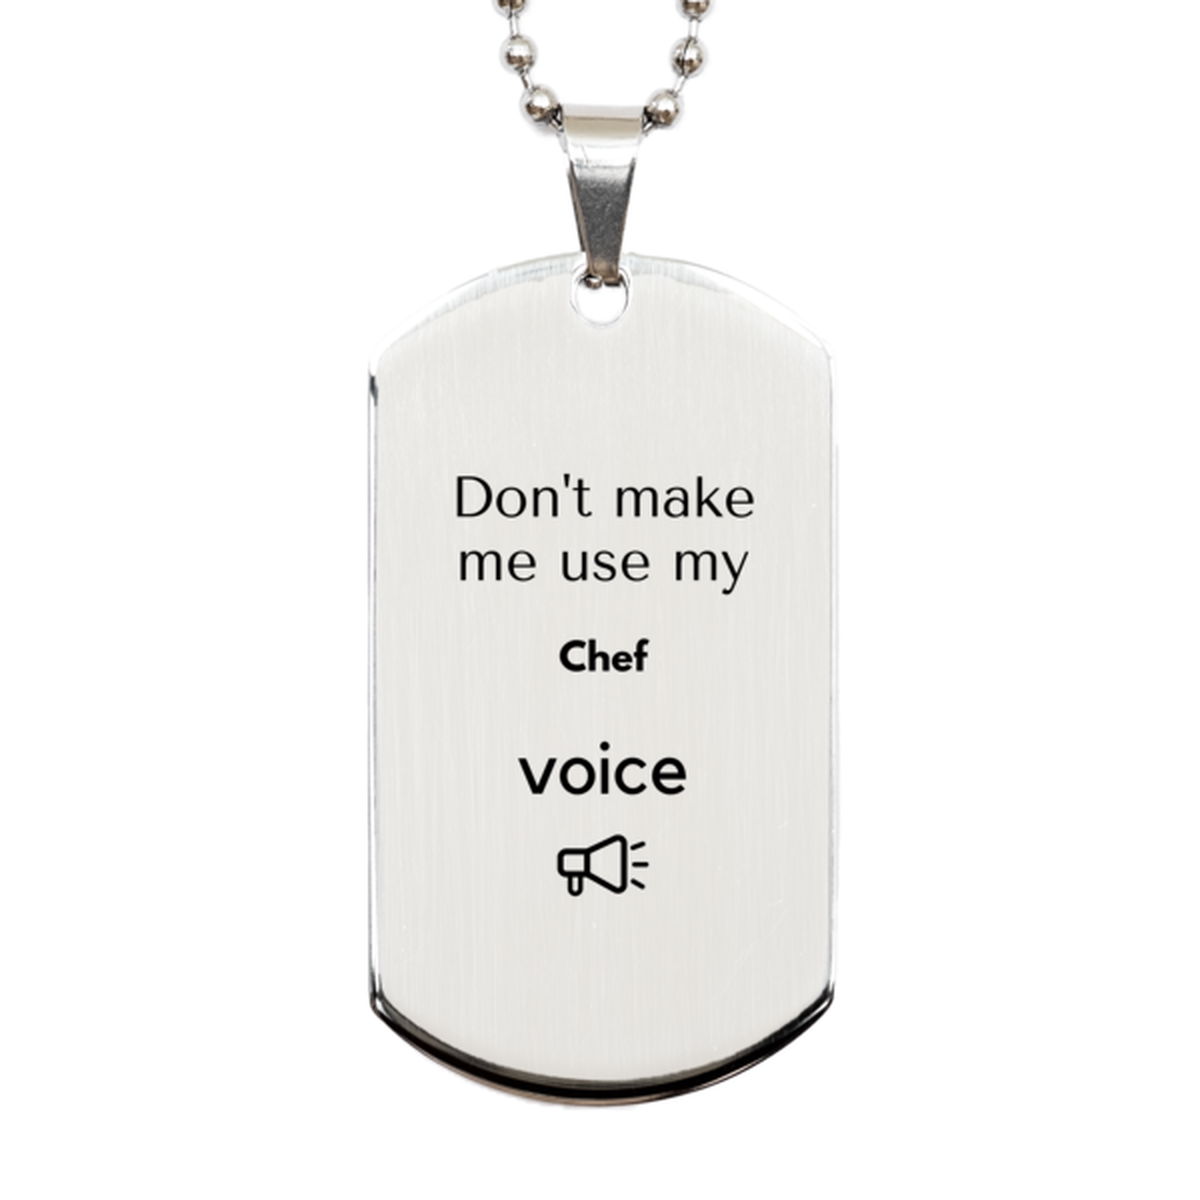 Don't make me use my Chef voice, Sarcasm Chef Gifts, Christmas Chef Silver Dog Tag Birthday Unique Gifts For Chef Coworkers, Men, Women, Colleague, Friends